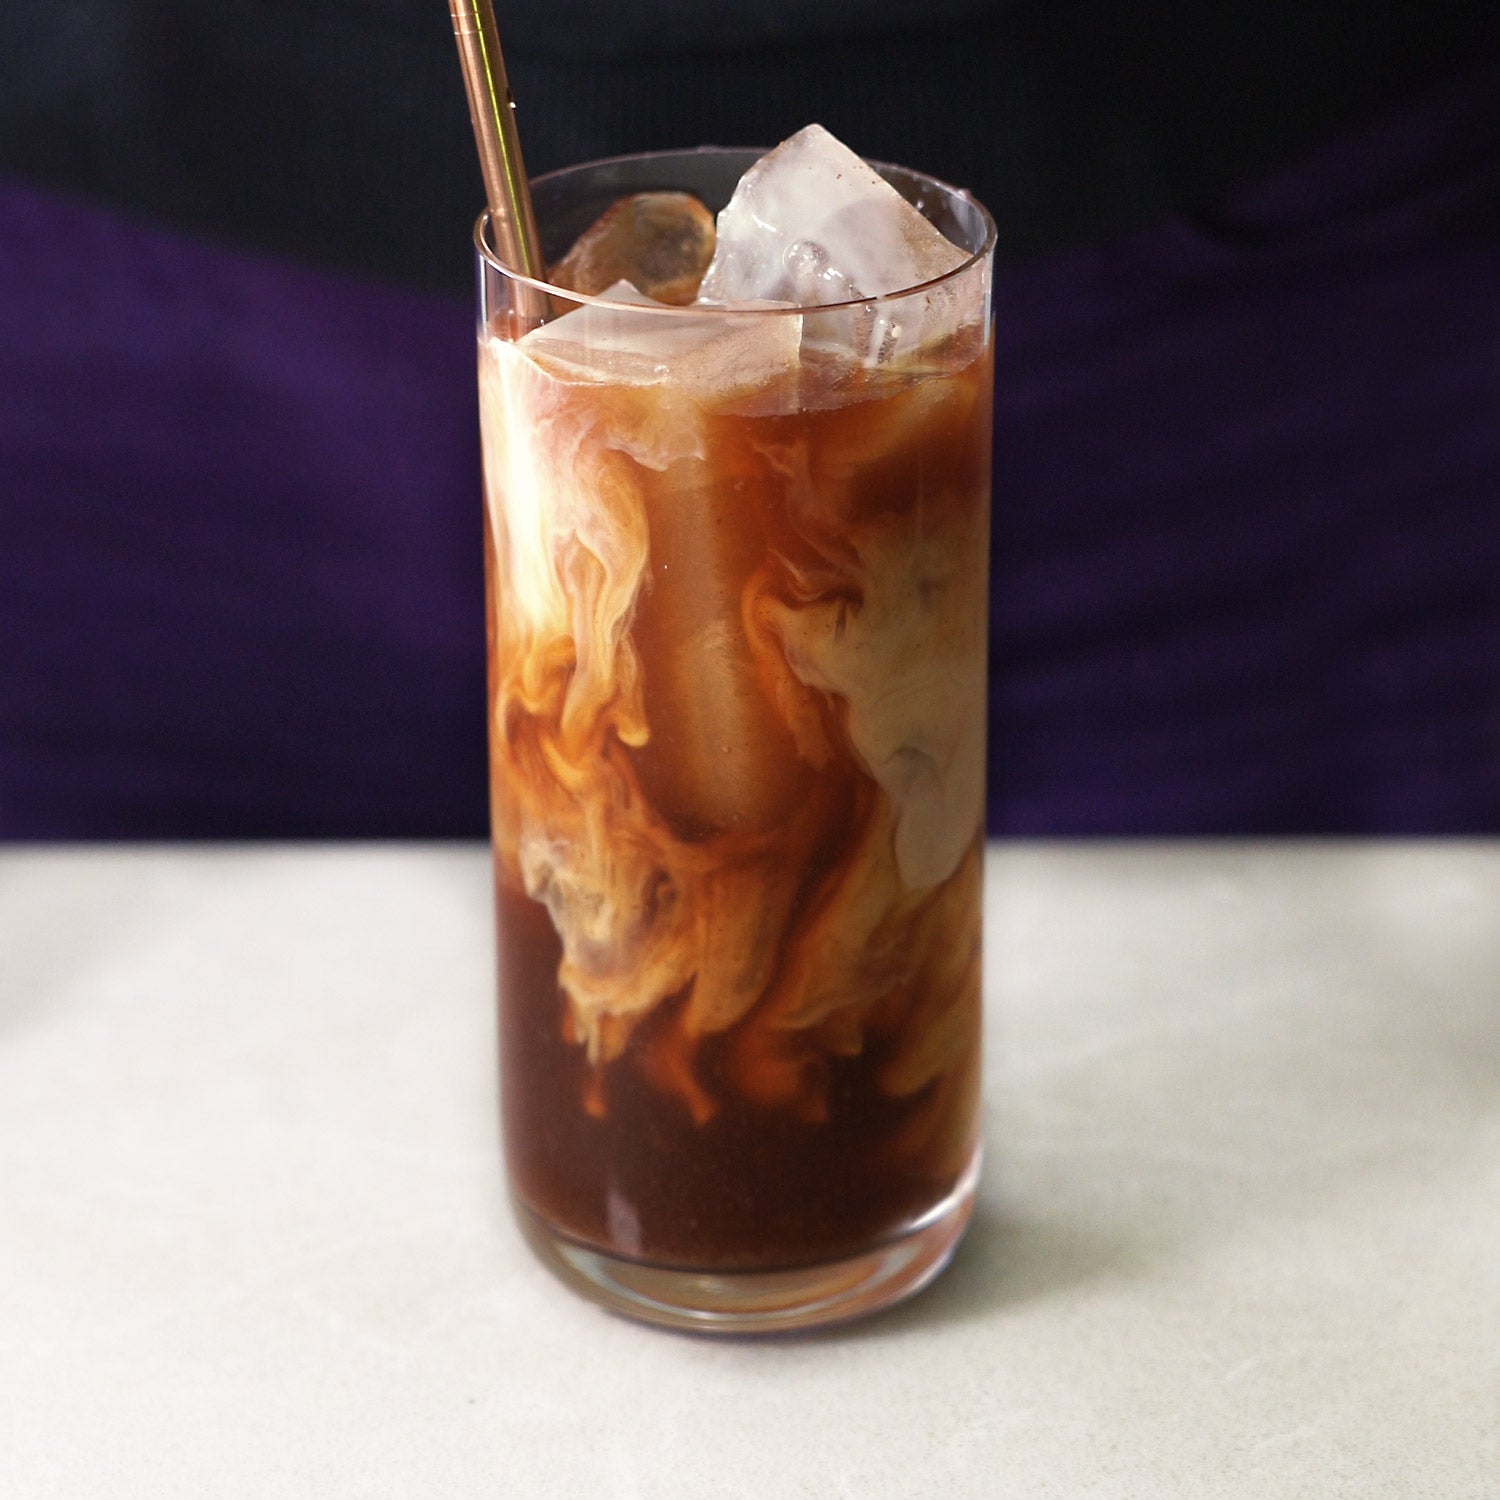 The best fake iced coffee we've ever had